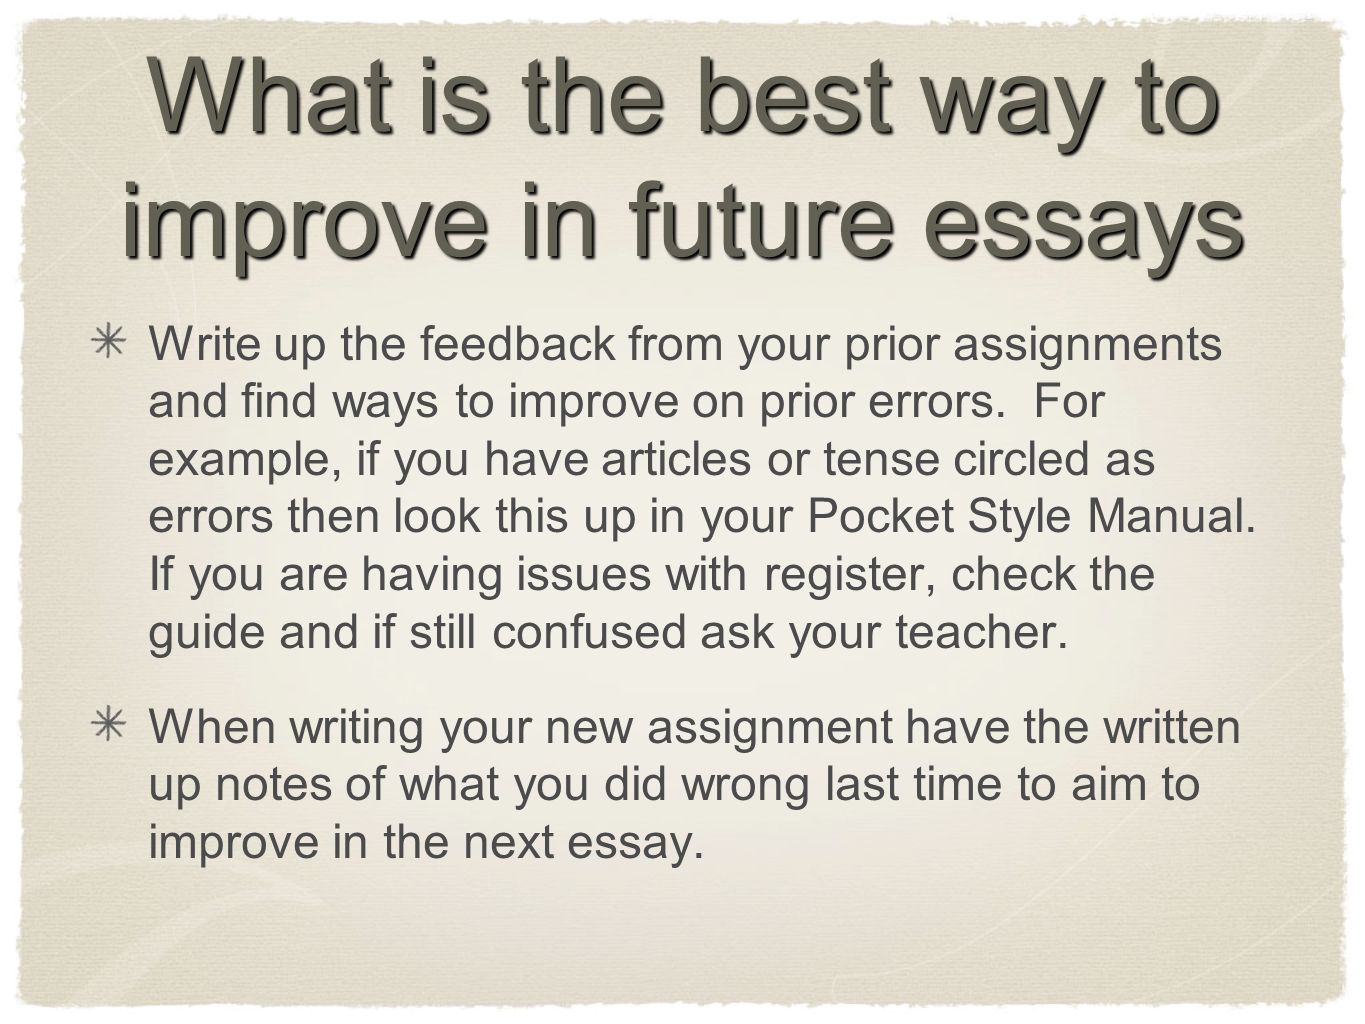 Essay find you текст. Future Plans сочинения. My Future Plans about essay. Your Future Plans essay. My Plans essay.